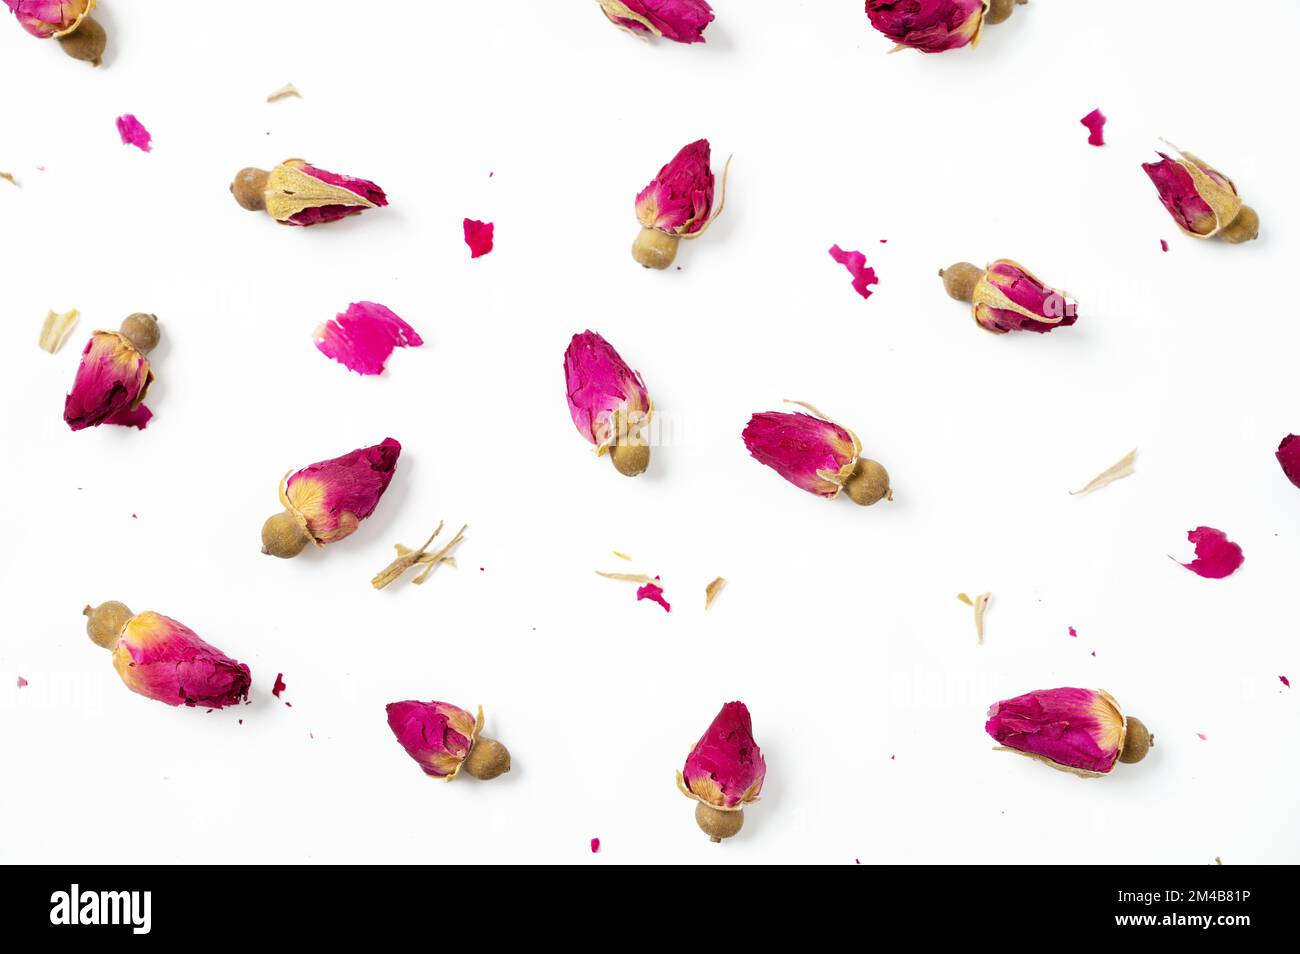 Flat lay dry rose buds on a white background. Concept pattern herbal tea. Top view. Stock Photo